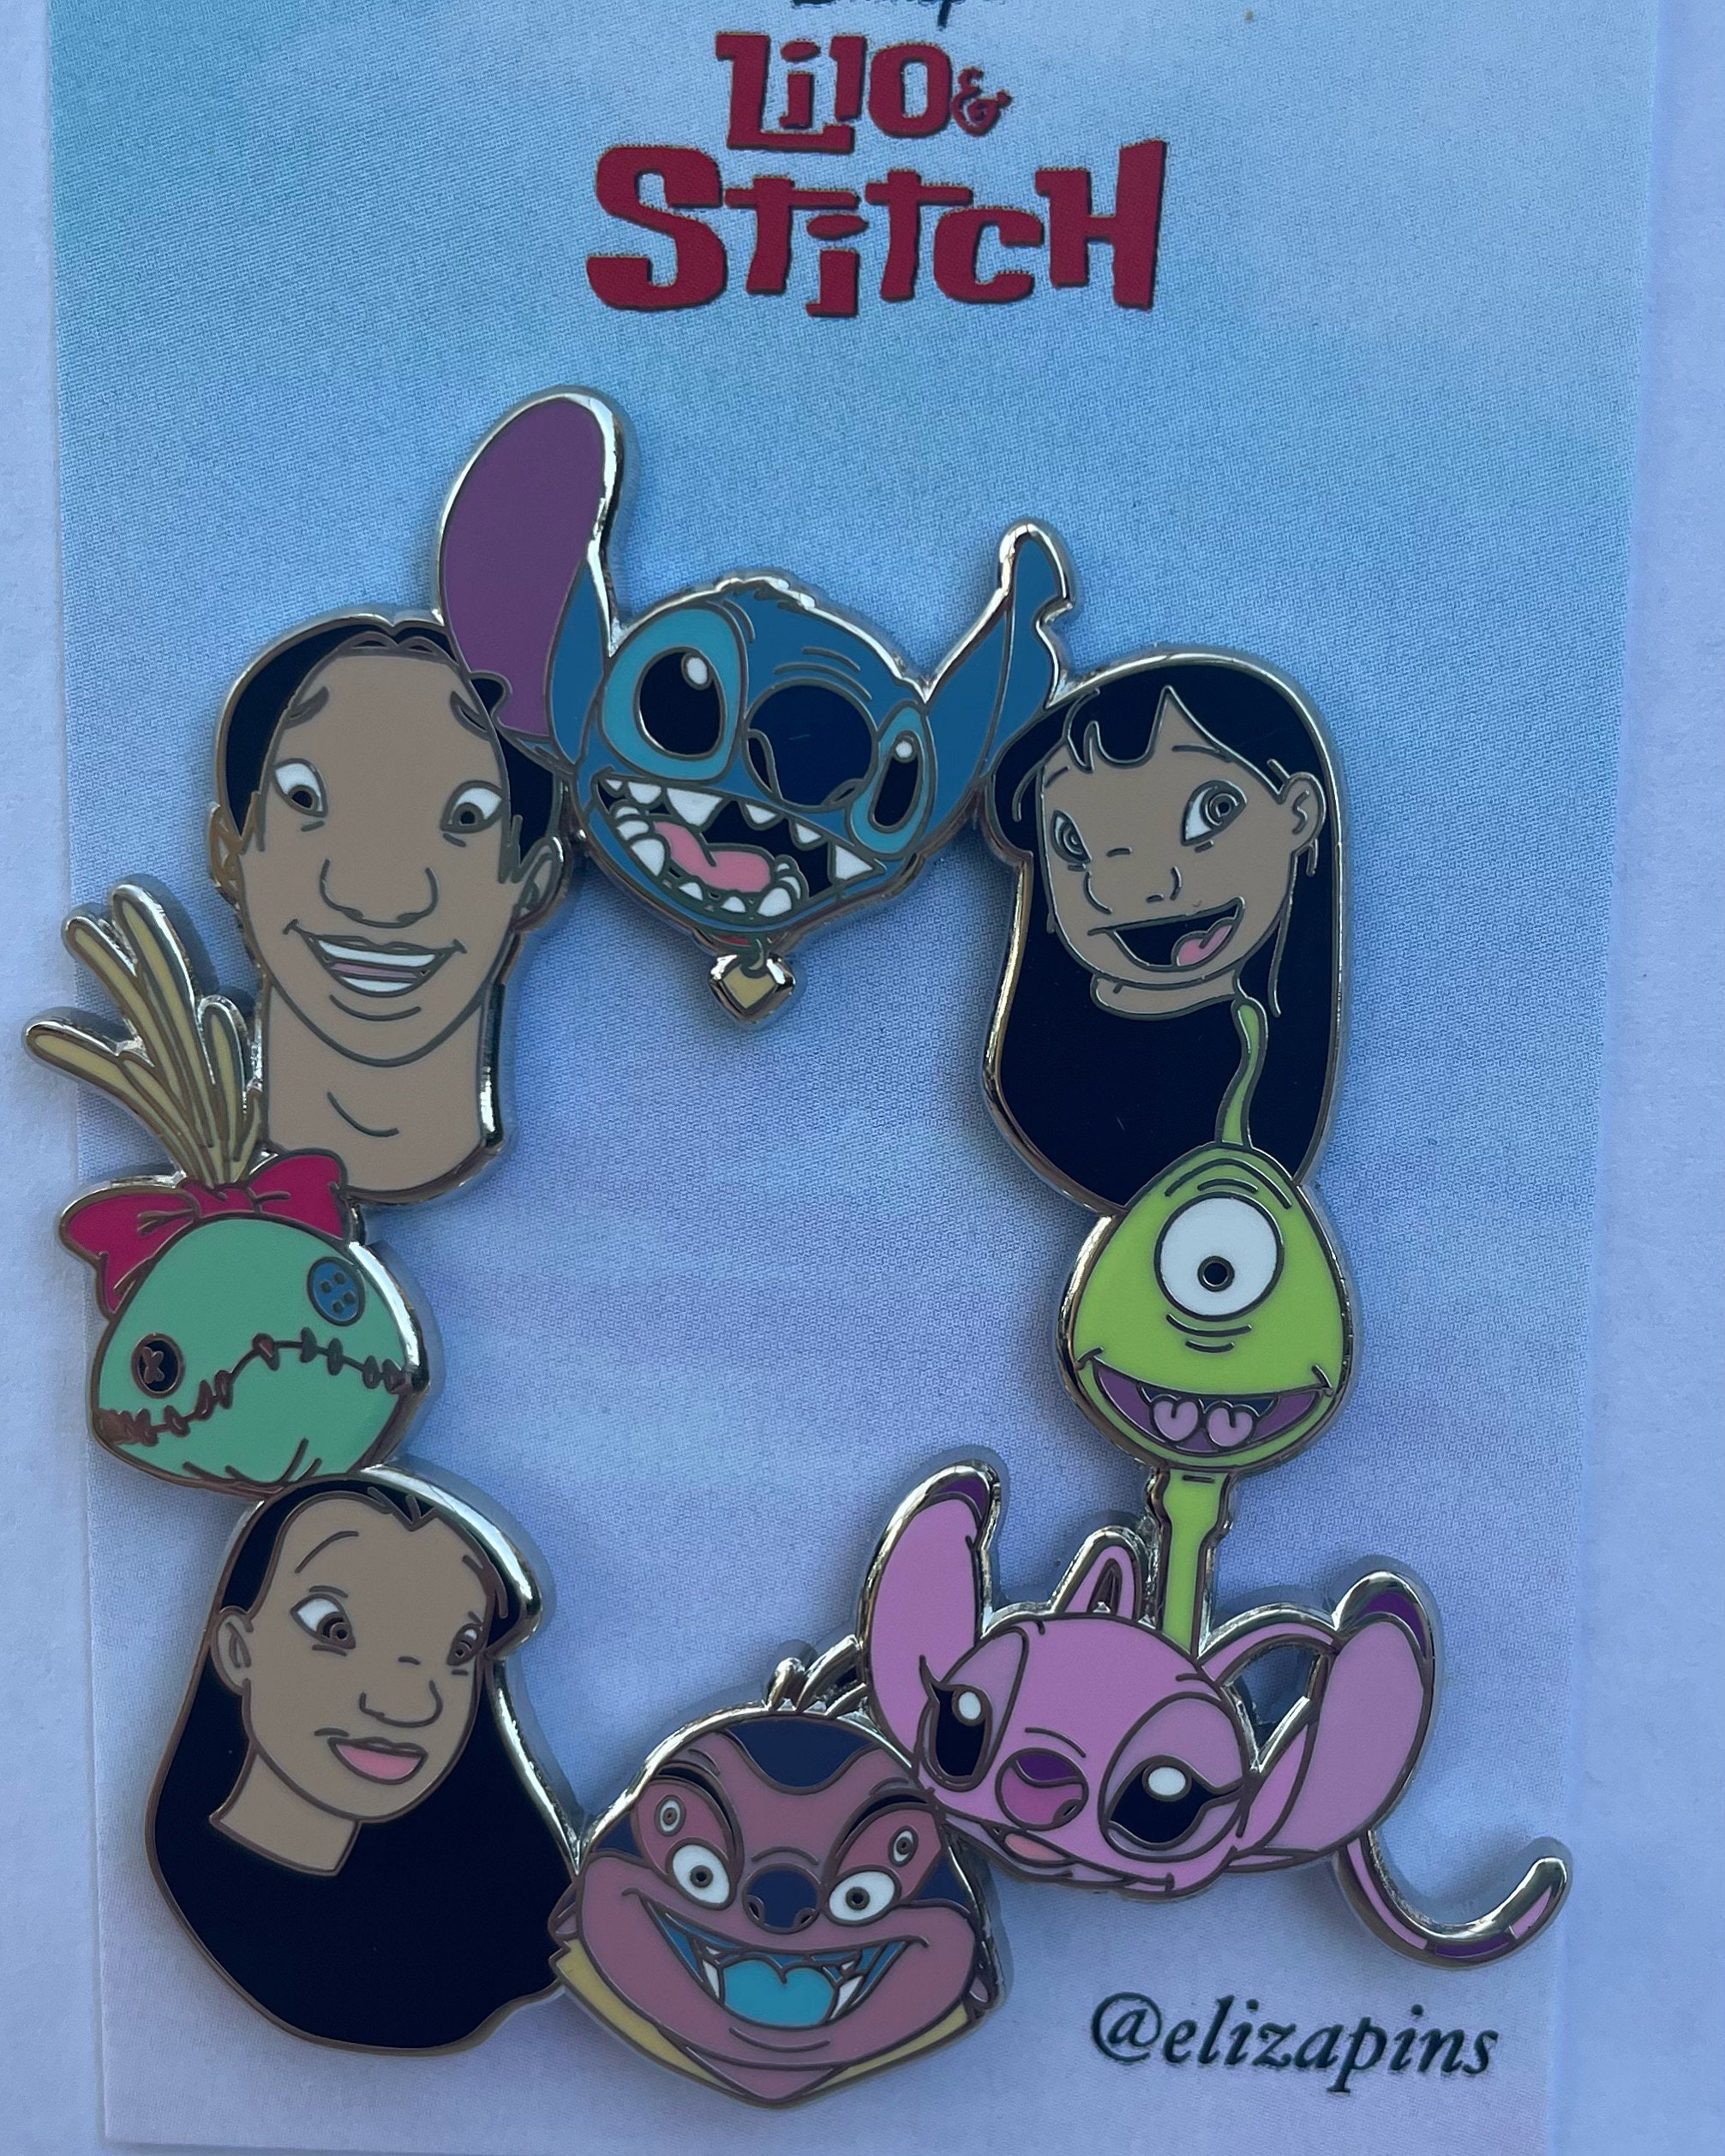 Lilo and Stitch Pins for sale. $5 shipping within 12 hours. : r/DisneyPins